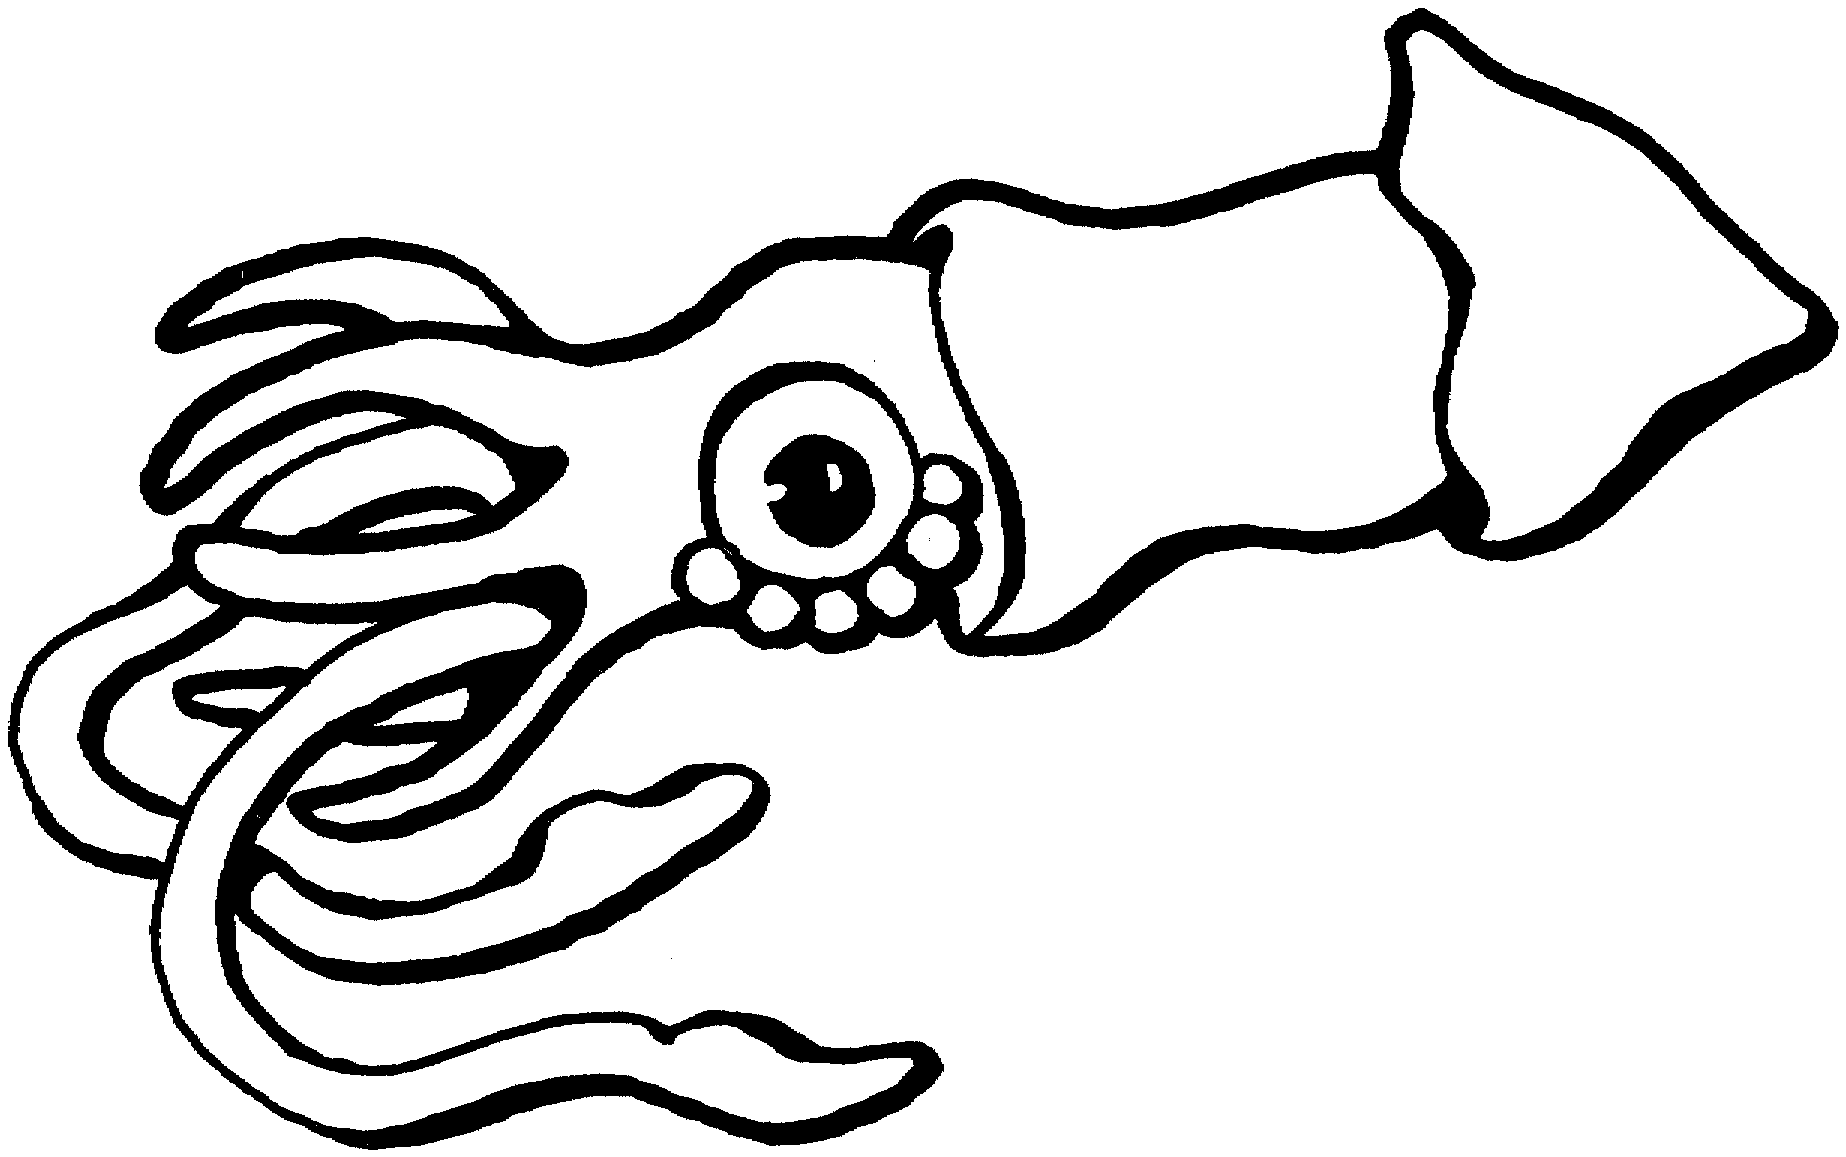 giant squid coloring pages 17 best images about entertaining the offspring on giant squid coloring pages 